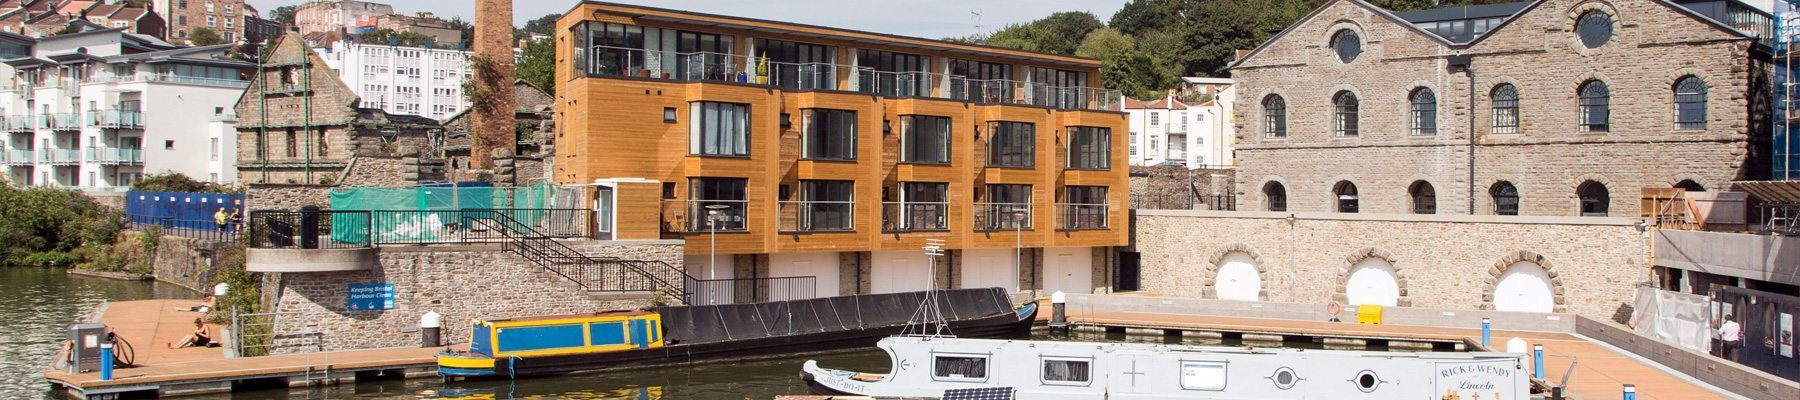 Adept Fire & Security secures The Boat House Bristol